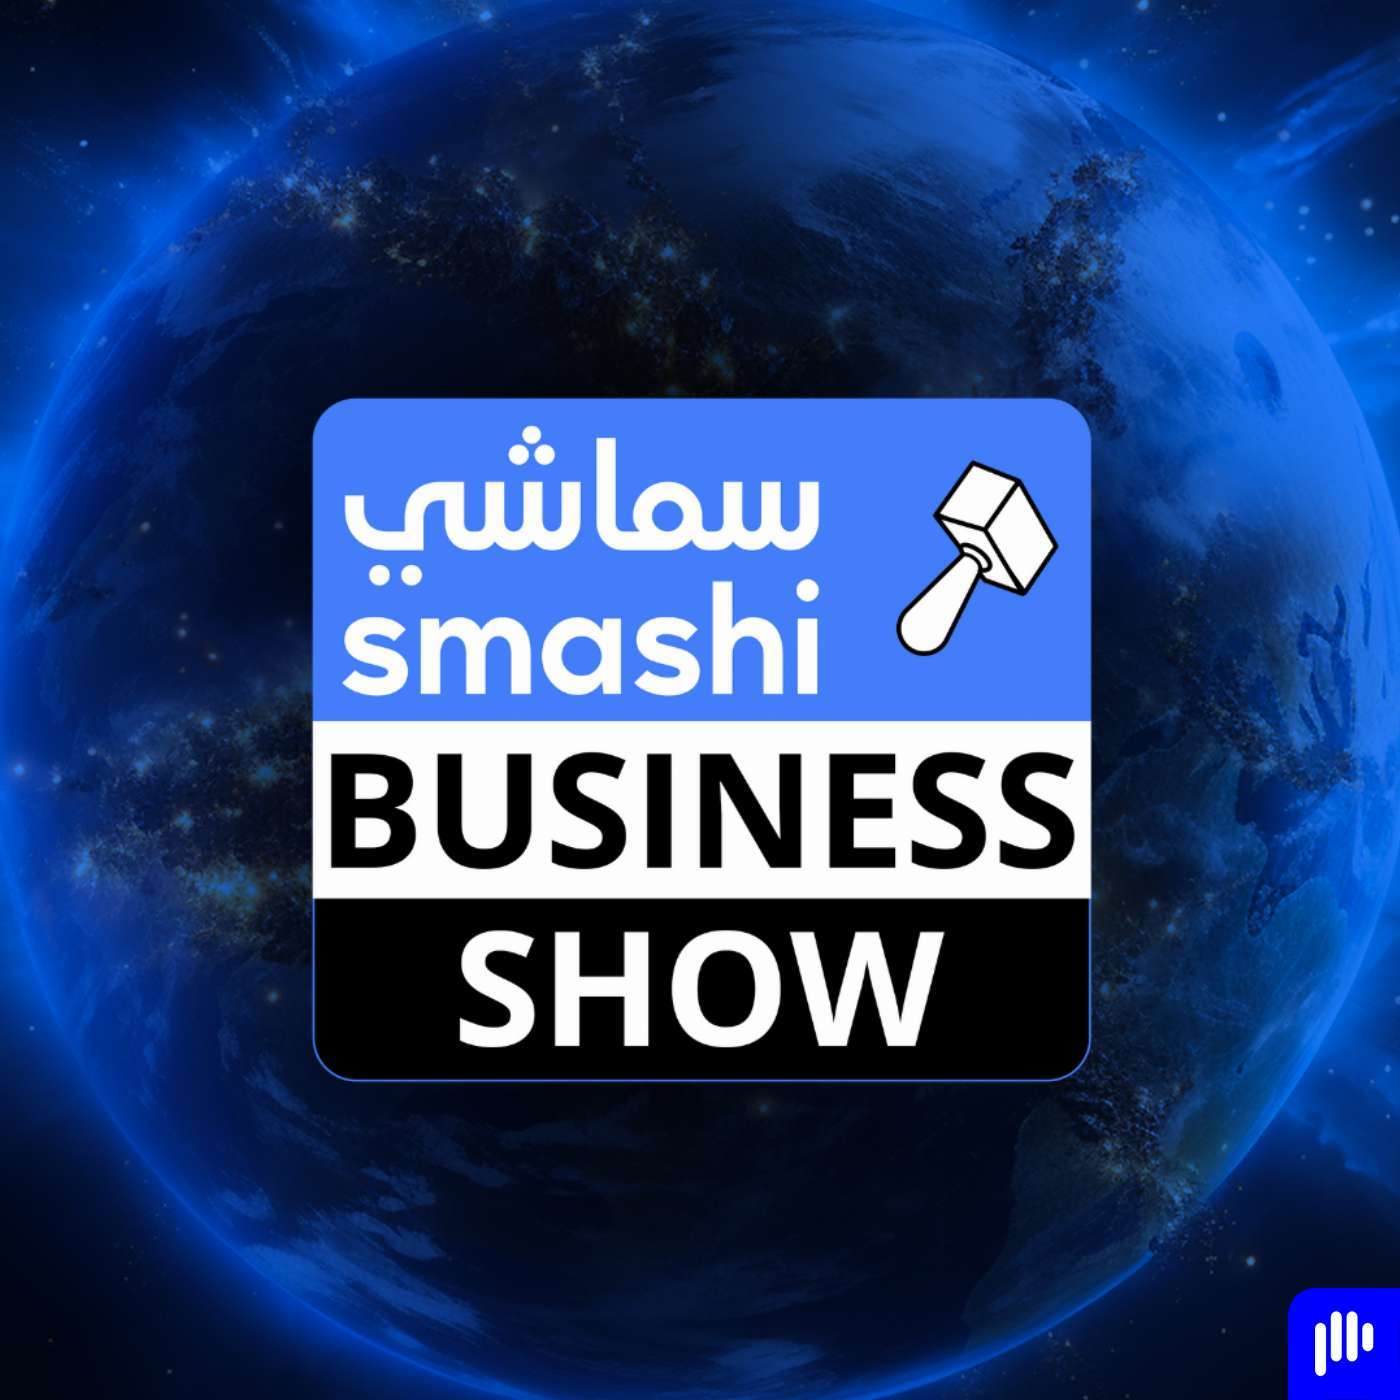 Ahmed Luxor and Amr Mansi, the people behind Shark Tank Egypt